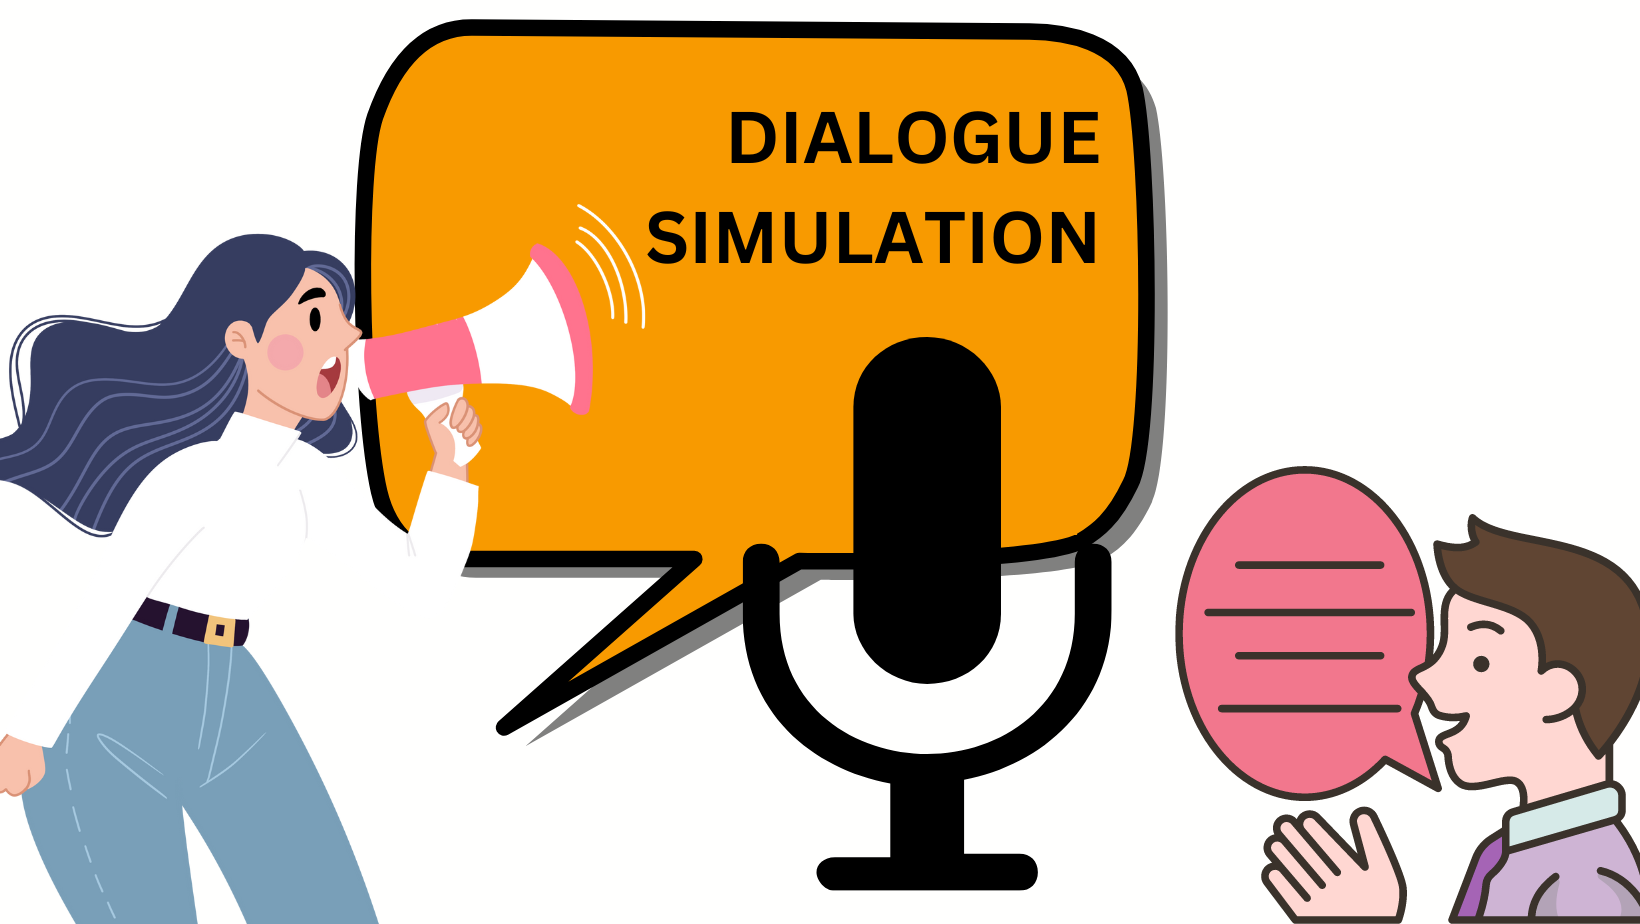 dialogue simulation for e-learning